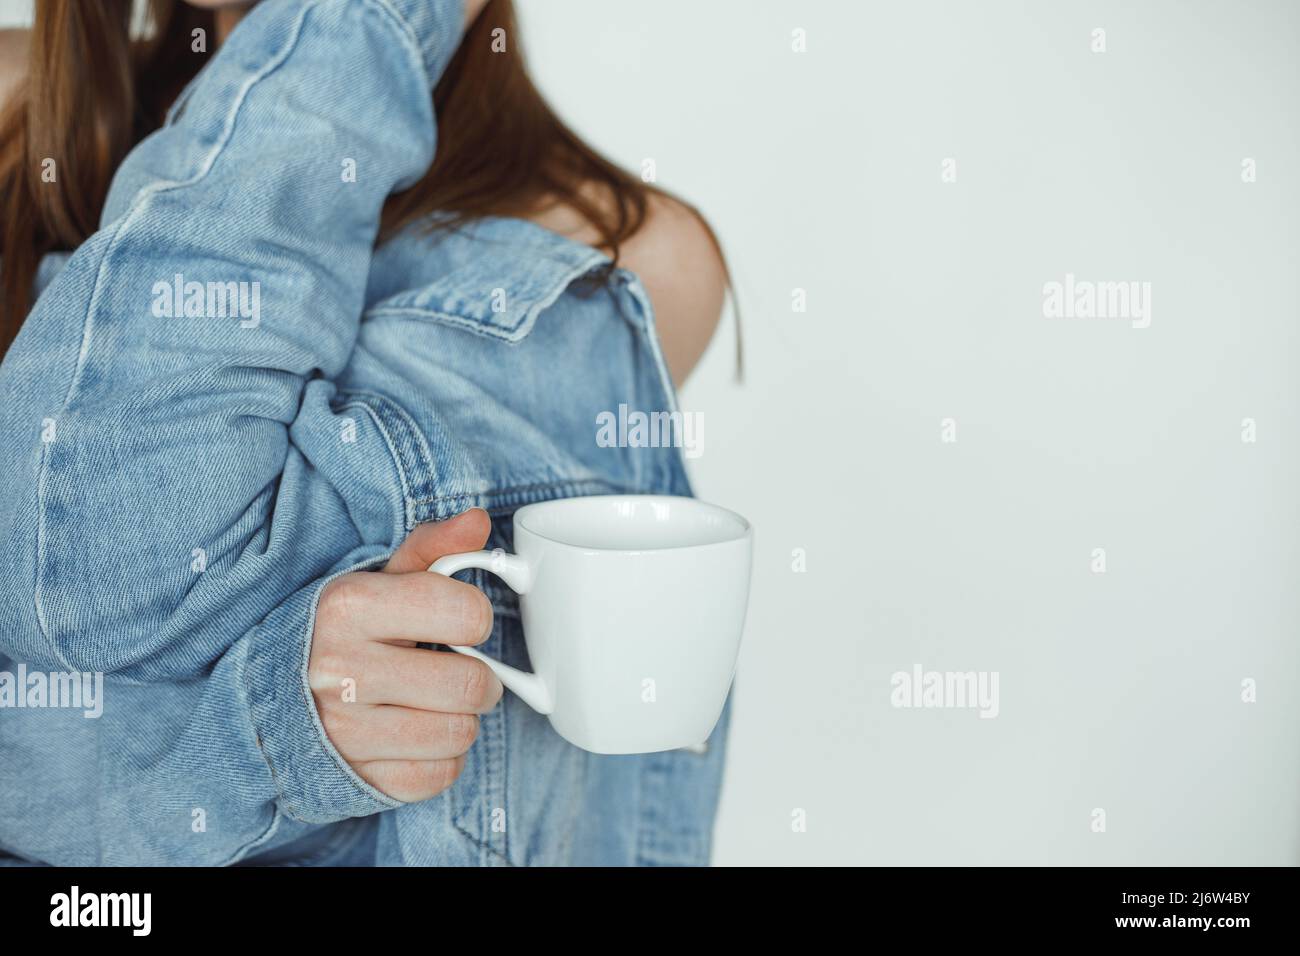 Cropped photo of woman with long dark hair wearing blue denim jacket backwards, holding white cup of coffee, posing. Stock Photo